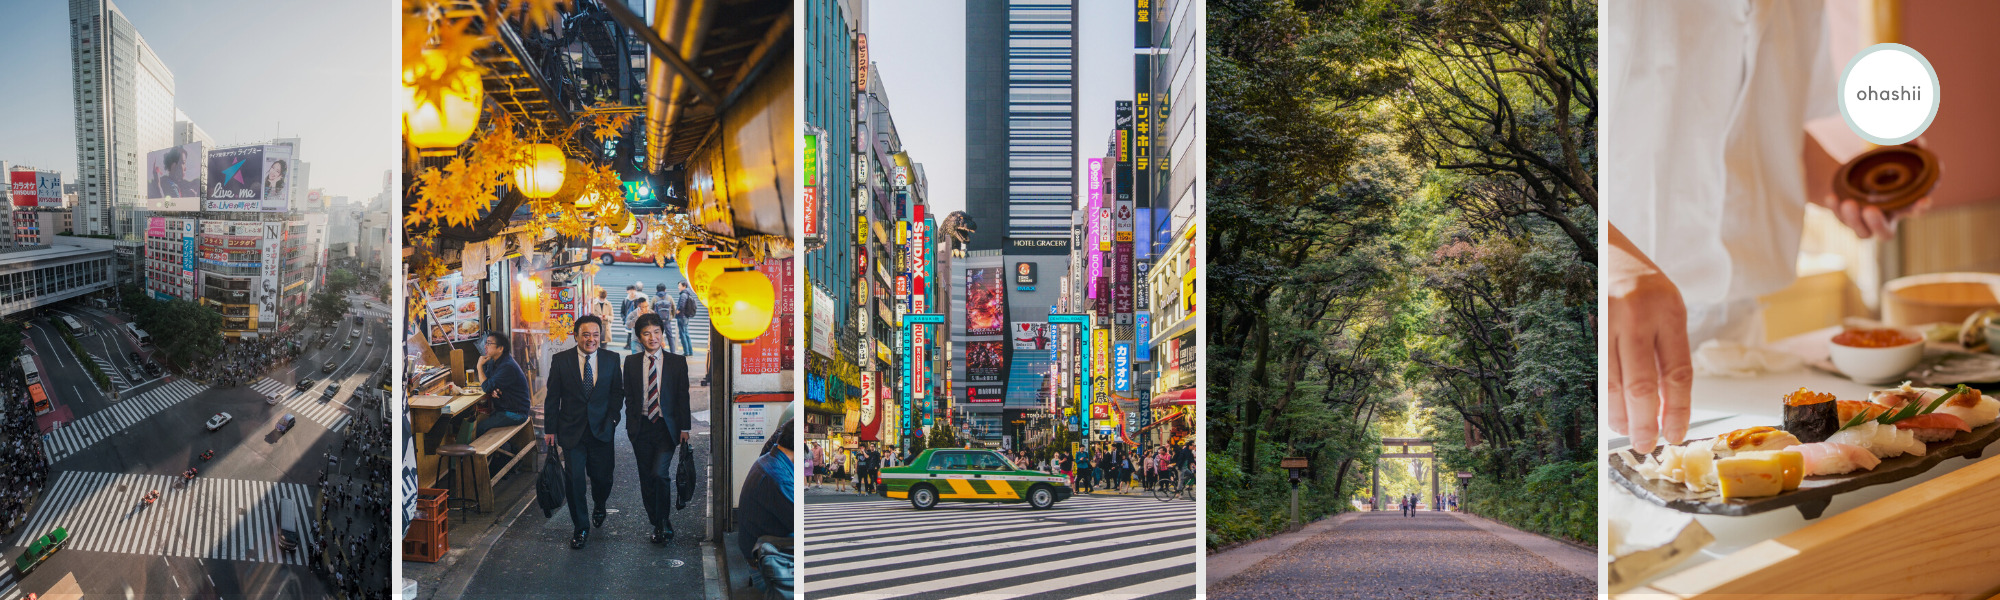 Travel Tokyo Like a Pro: 10 Tips for First-Time Visitors 🗼